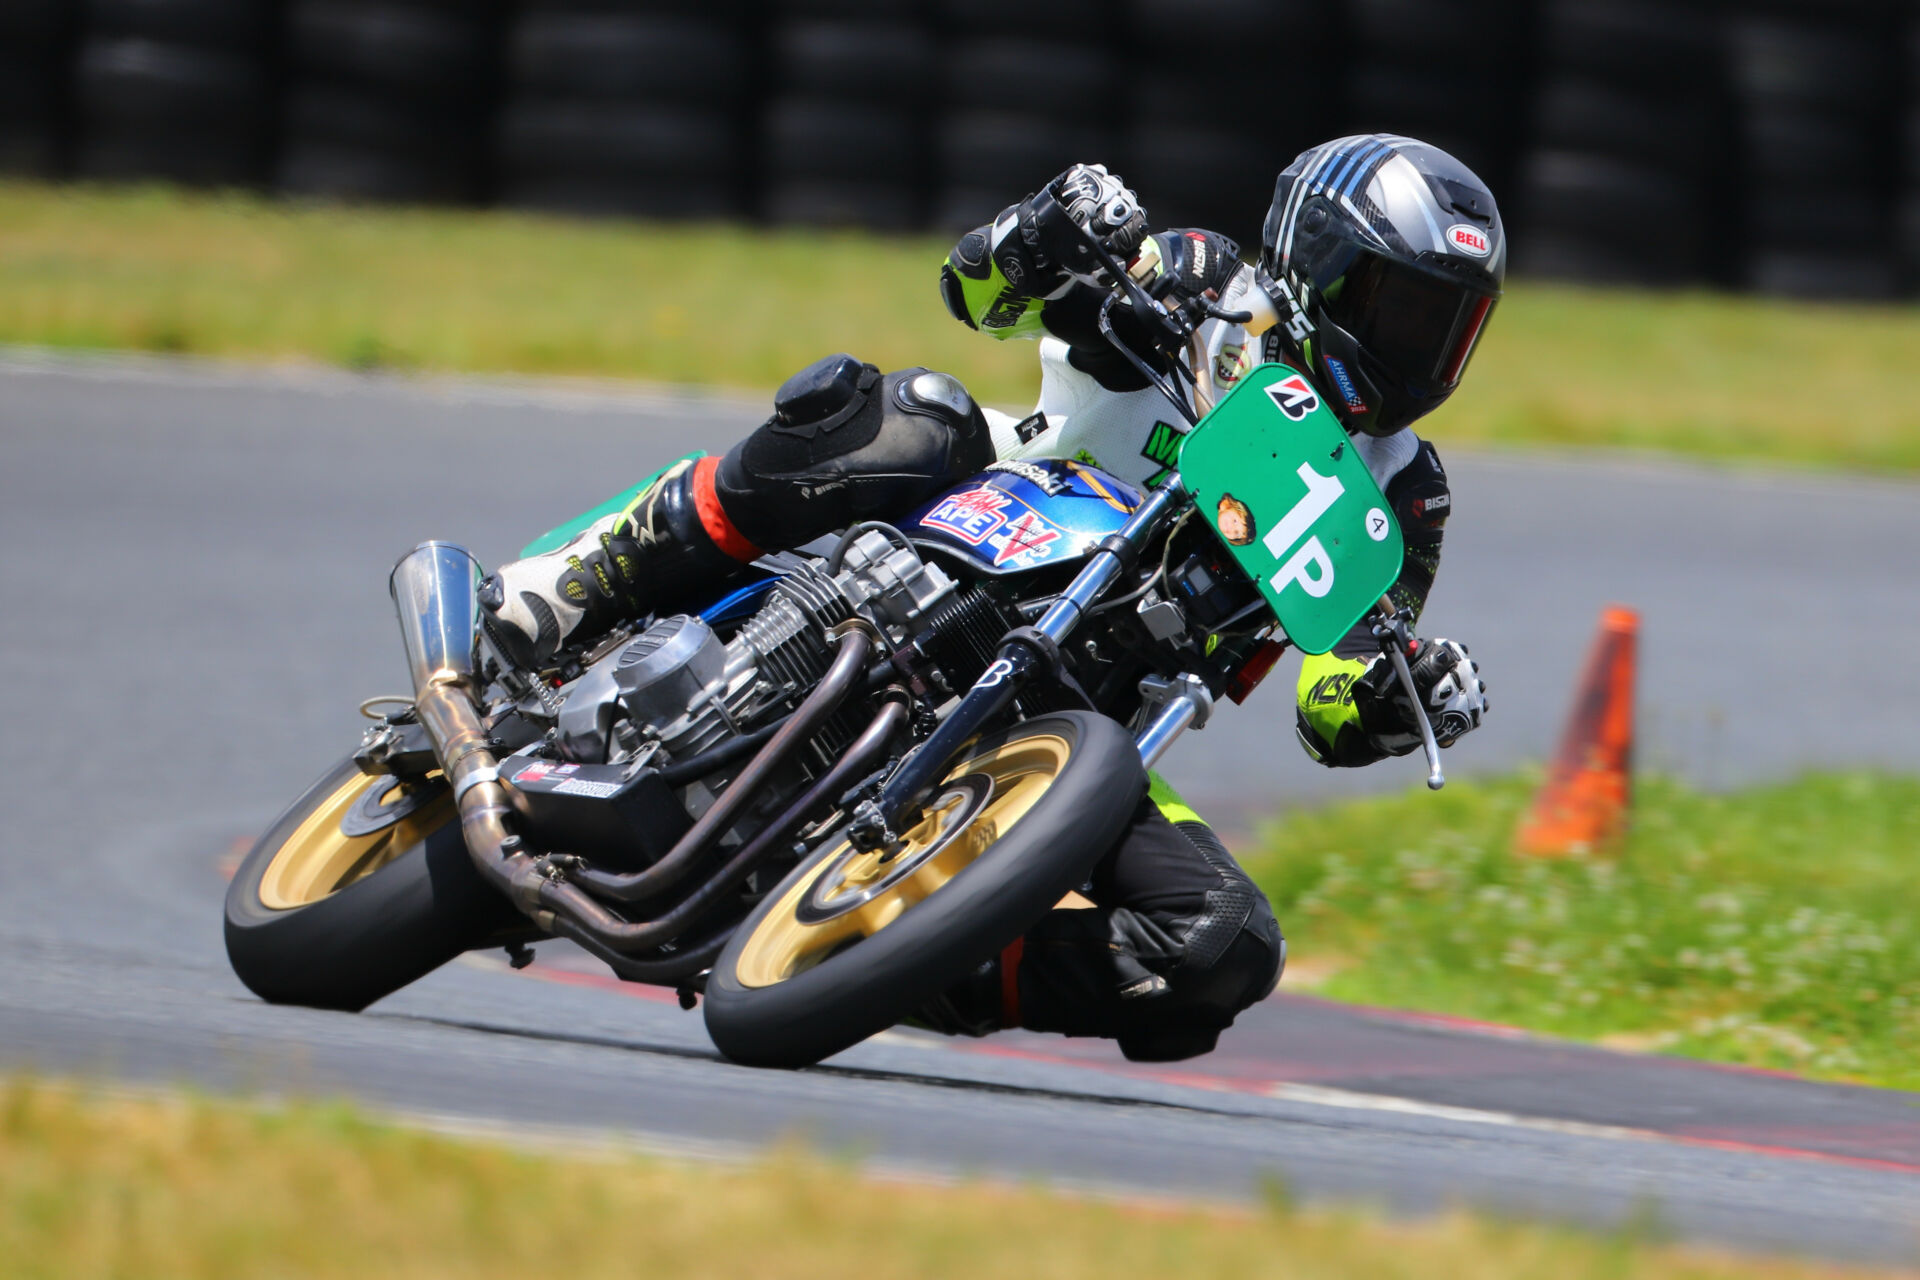 Jeremy Maddrill (1P) at speed at New Jersey Motorsports Park. Photo by etechphoto.com, courtesy AHRMA.